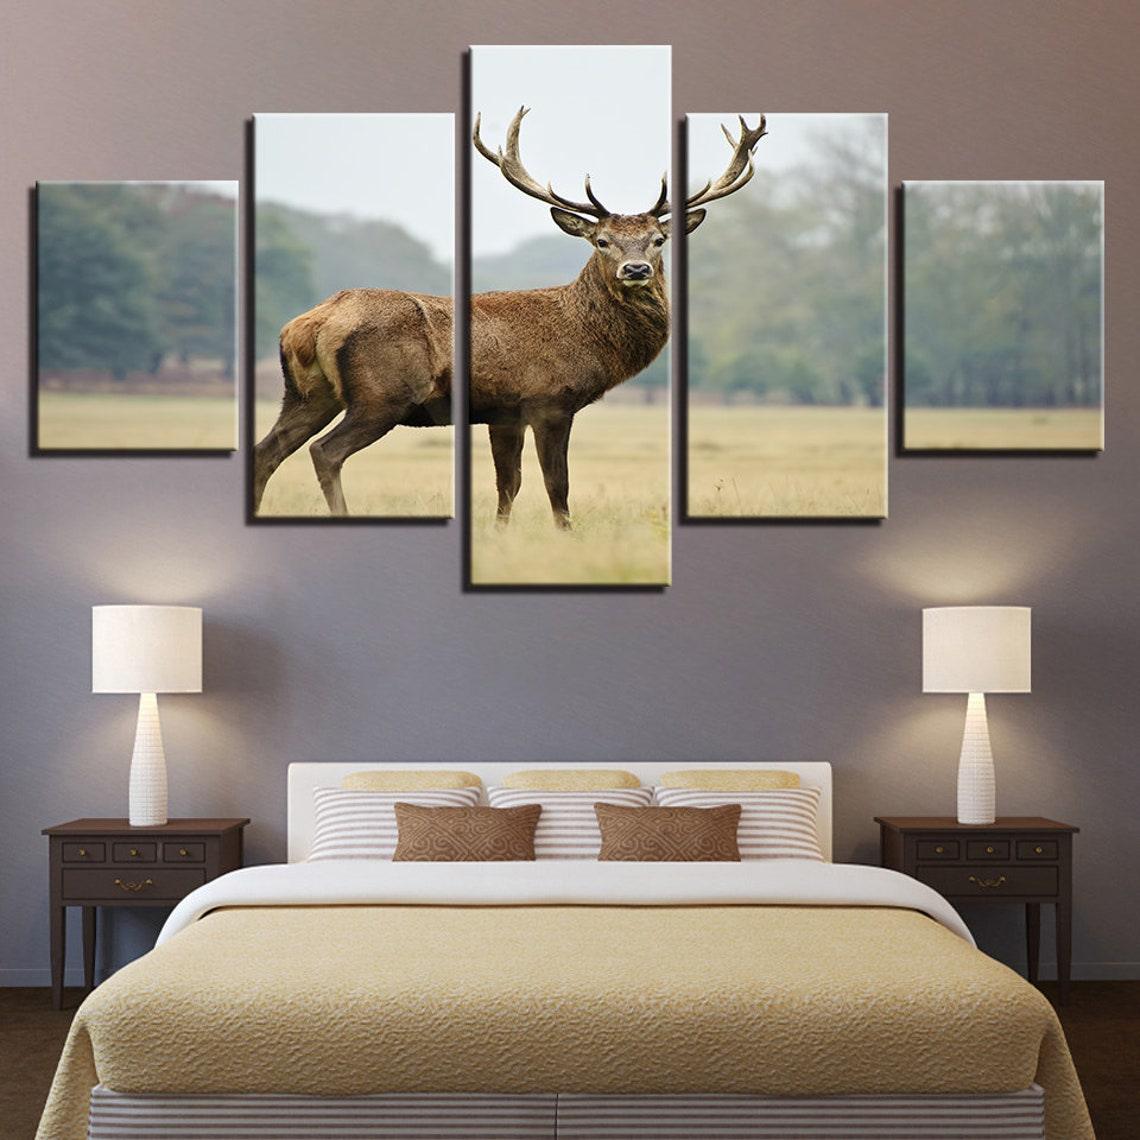 White Tailed Buck 5 Panel Canvas Print Wall Art Hunting Deer - GotItHere.com